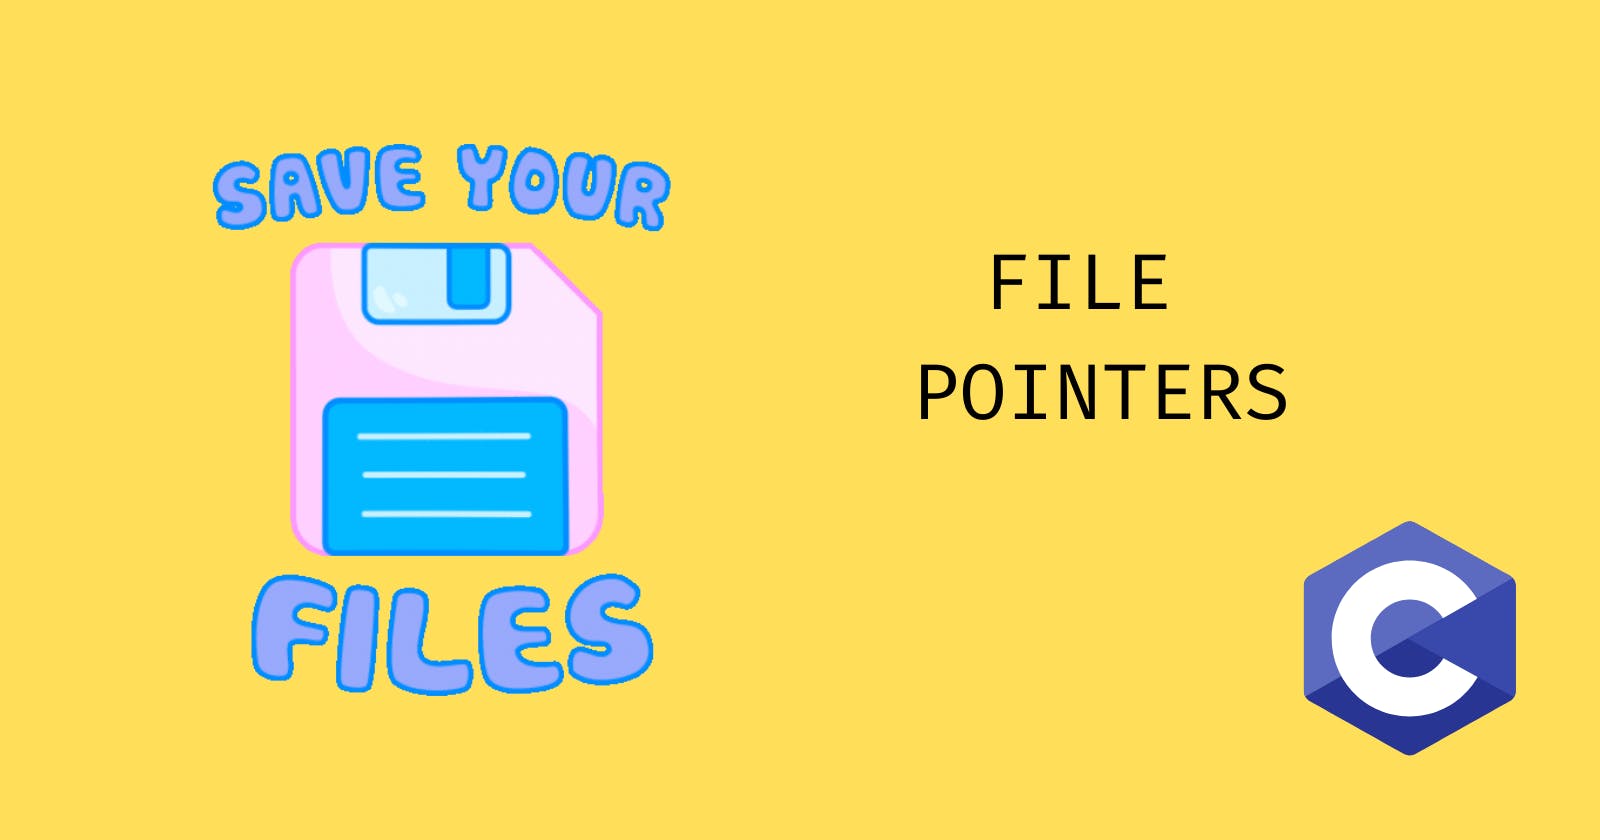 File pointers in C